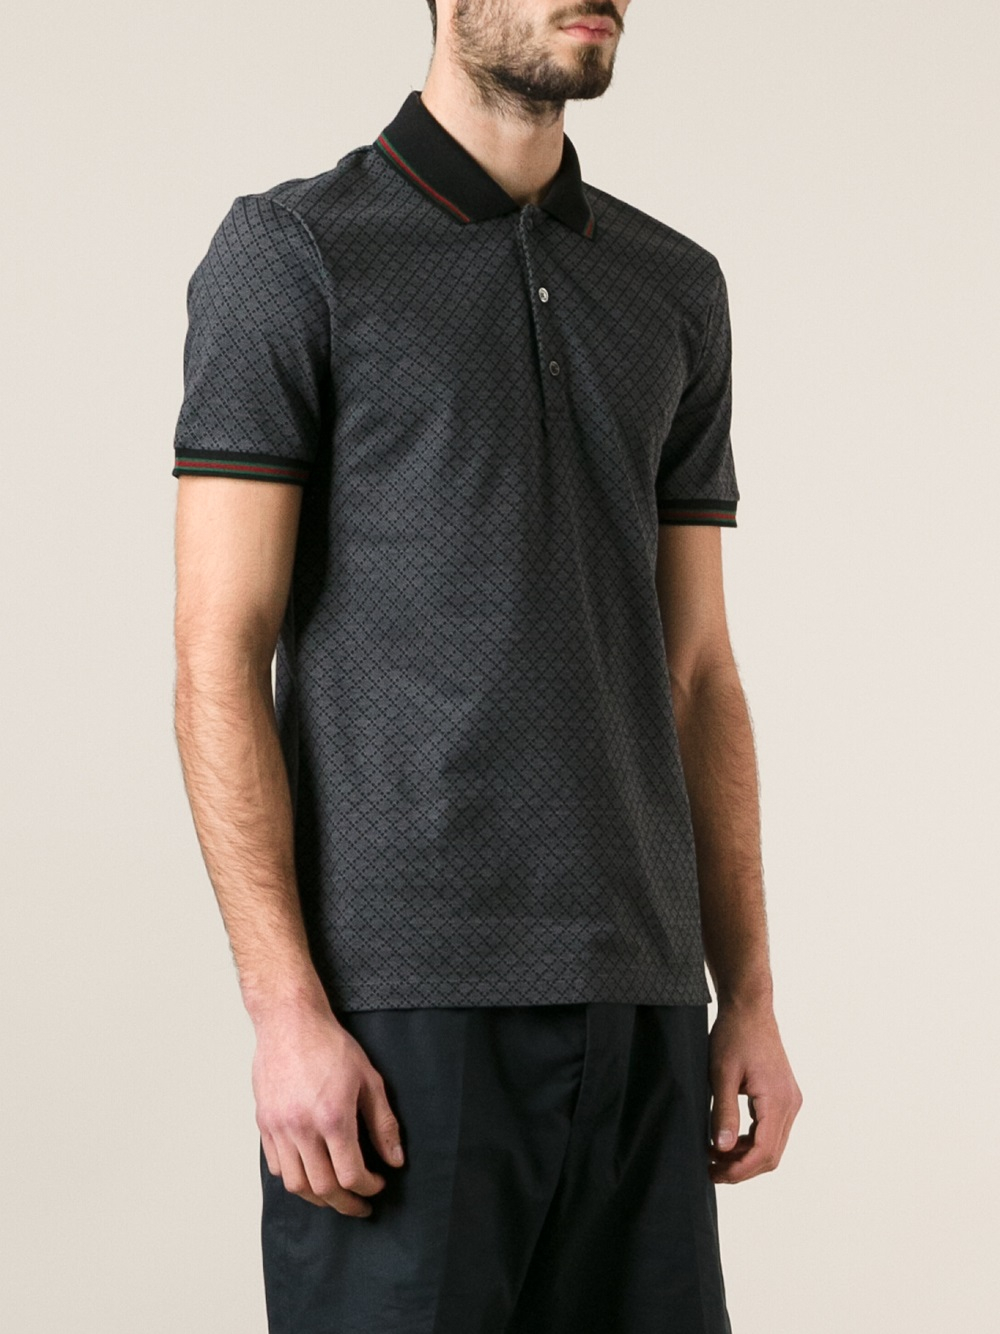 Gucci Diamond Pattern Polo Shirt in Grey (Gray) for Men - Lyst